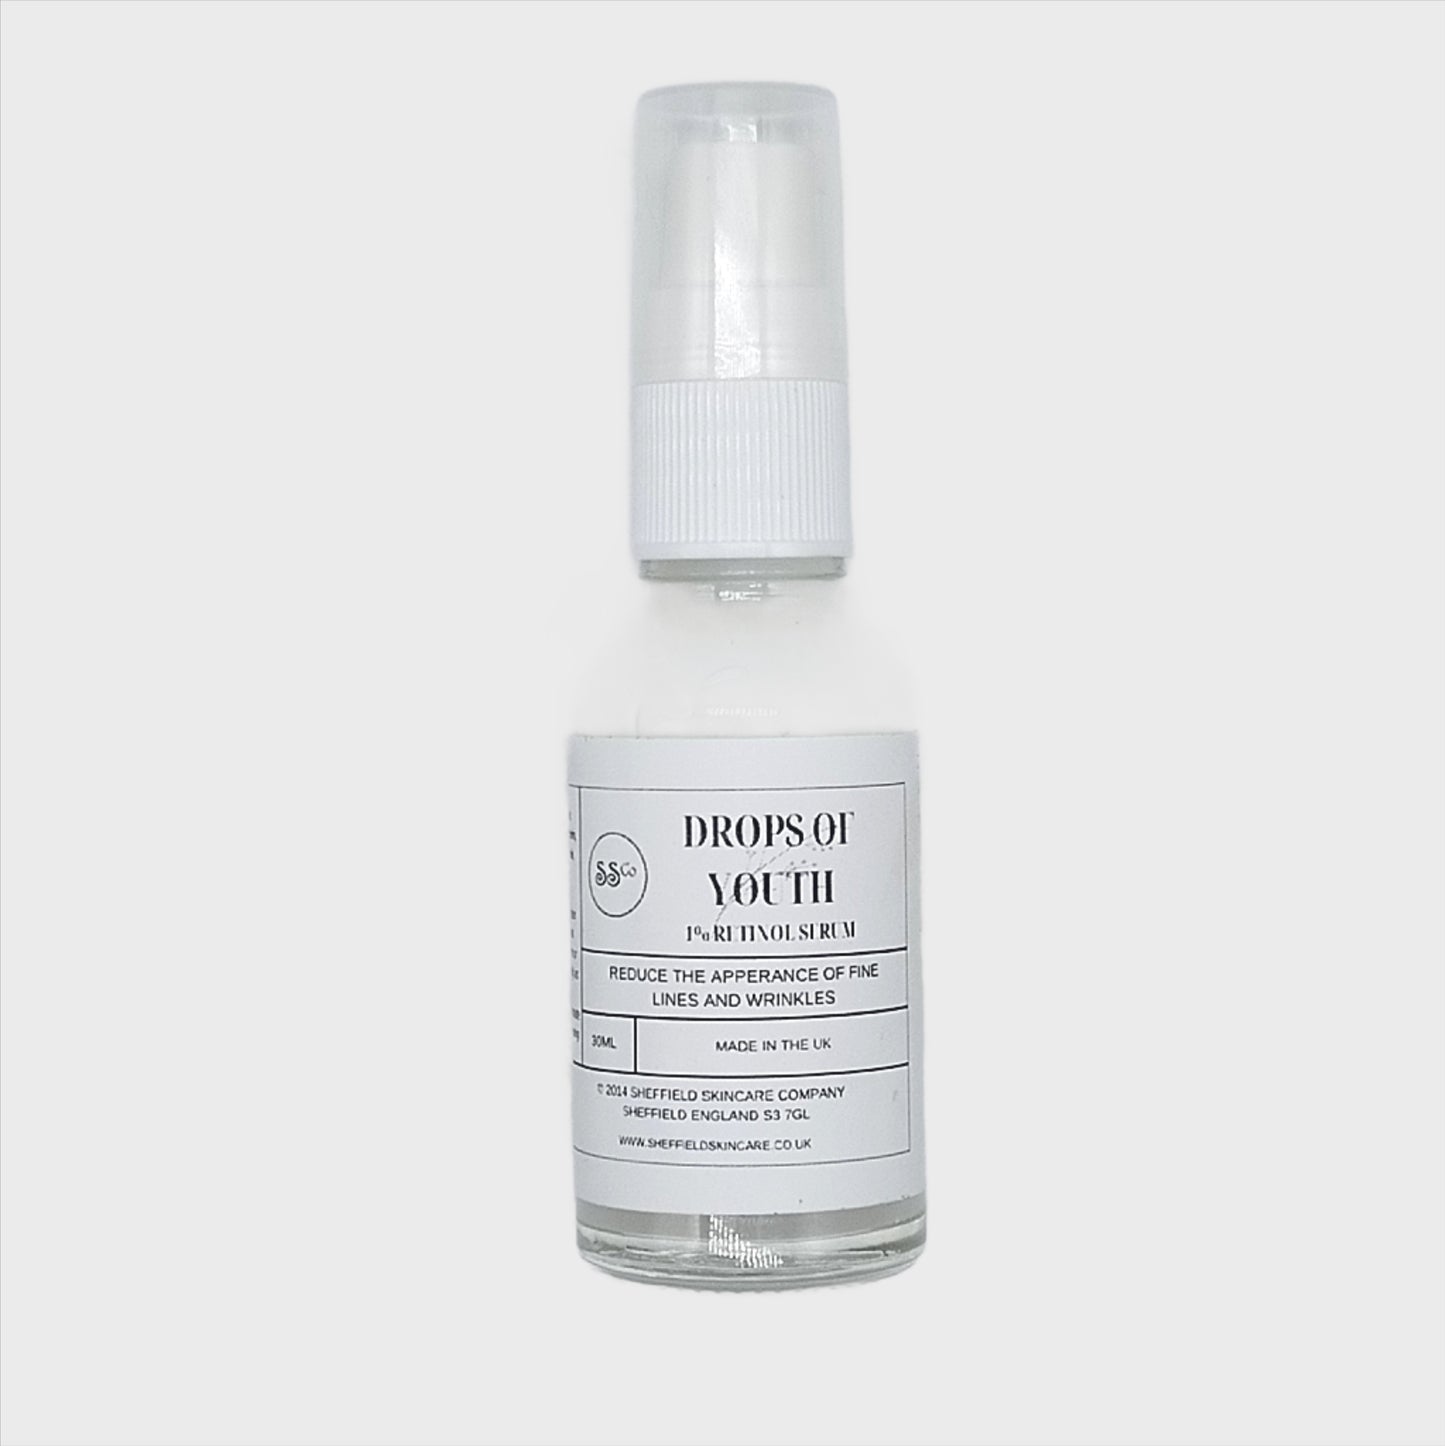 Drops of Youth 30ml